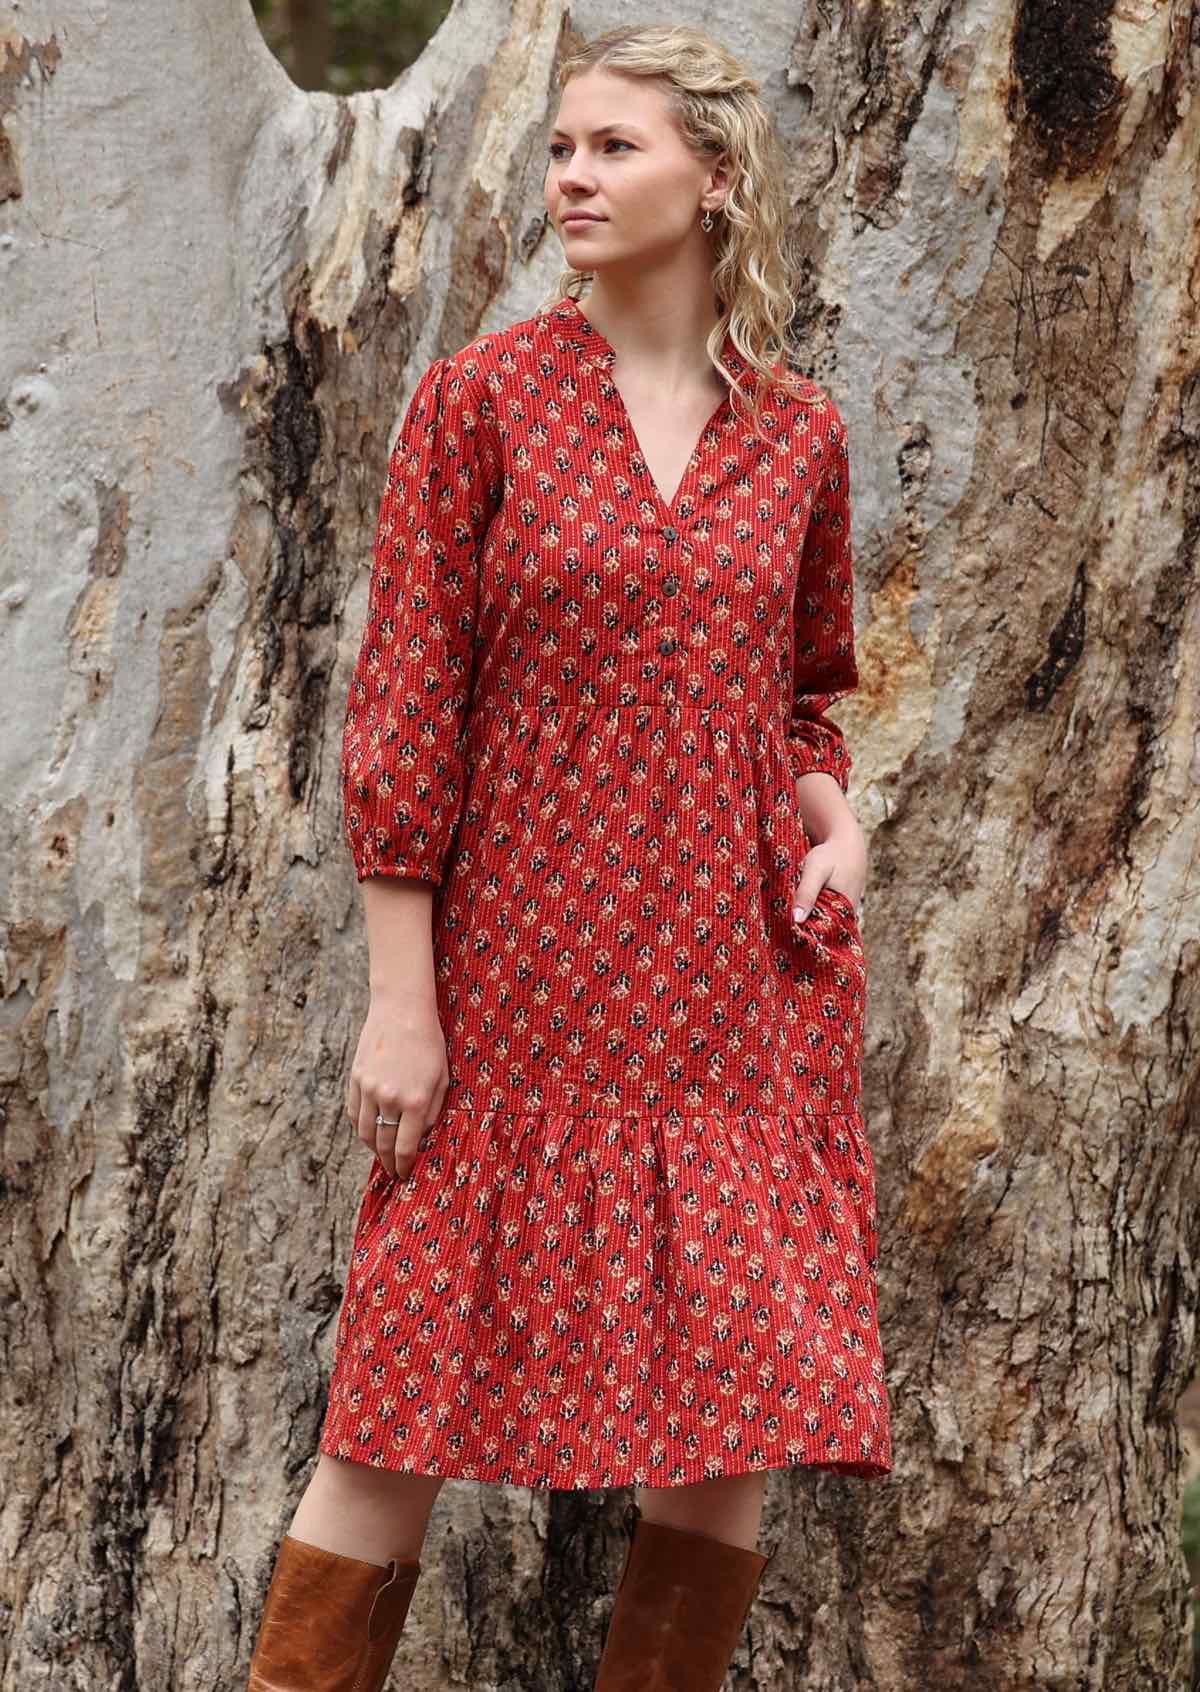 Midi length cotton boho dress with buttoned bodice and pockets